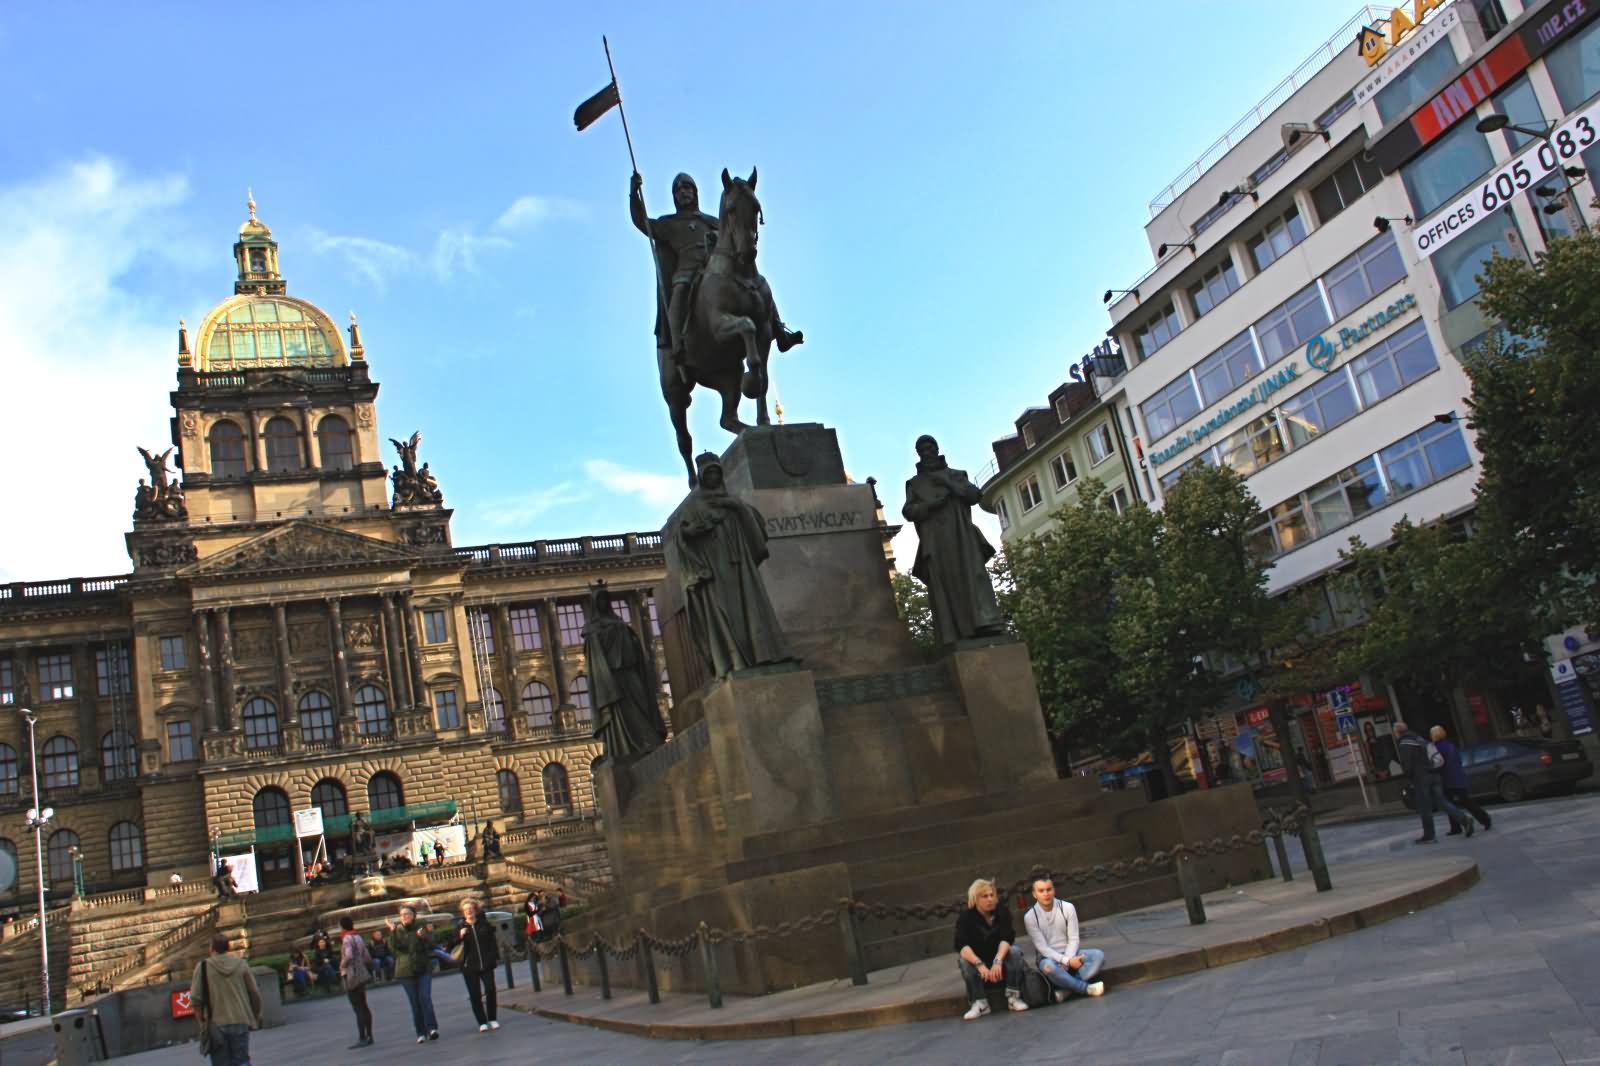 A Statue Of Saint Wenceslas In The Upper Part Of The Wenceslas Square In Prague